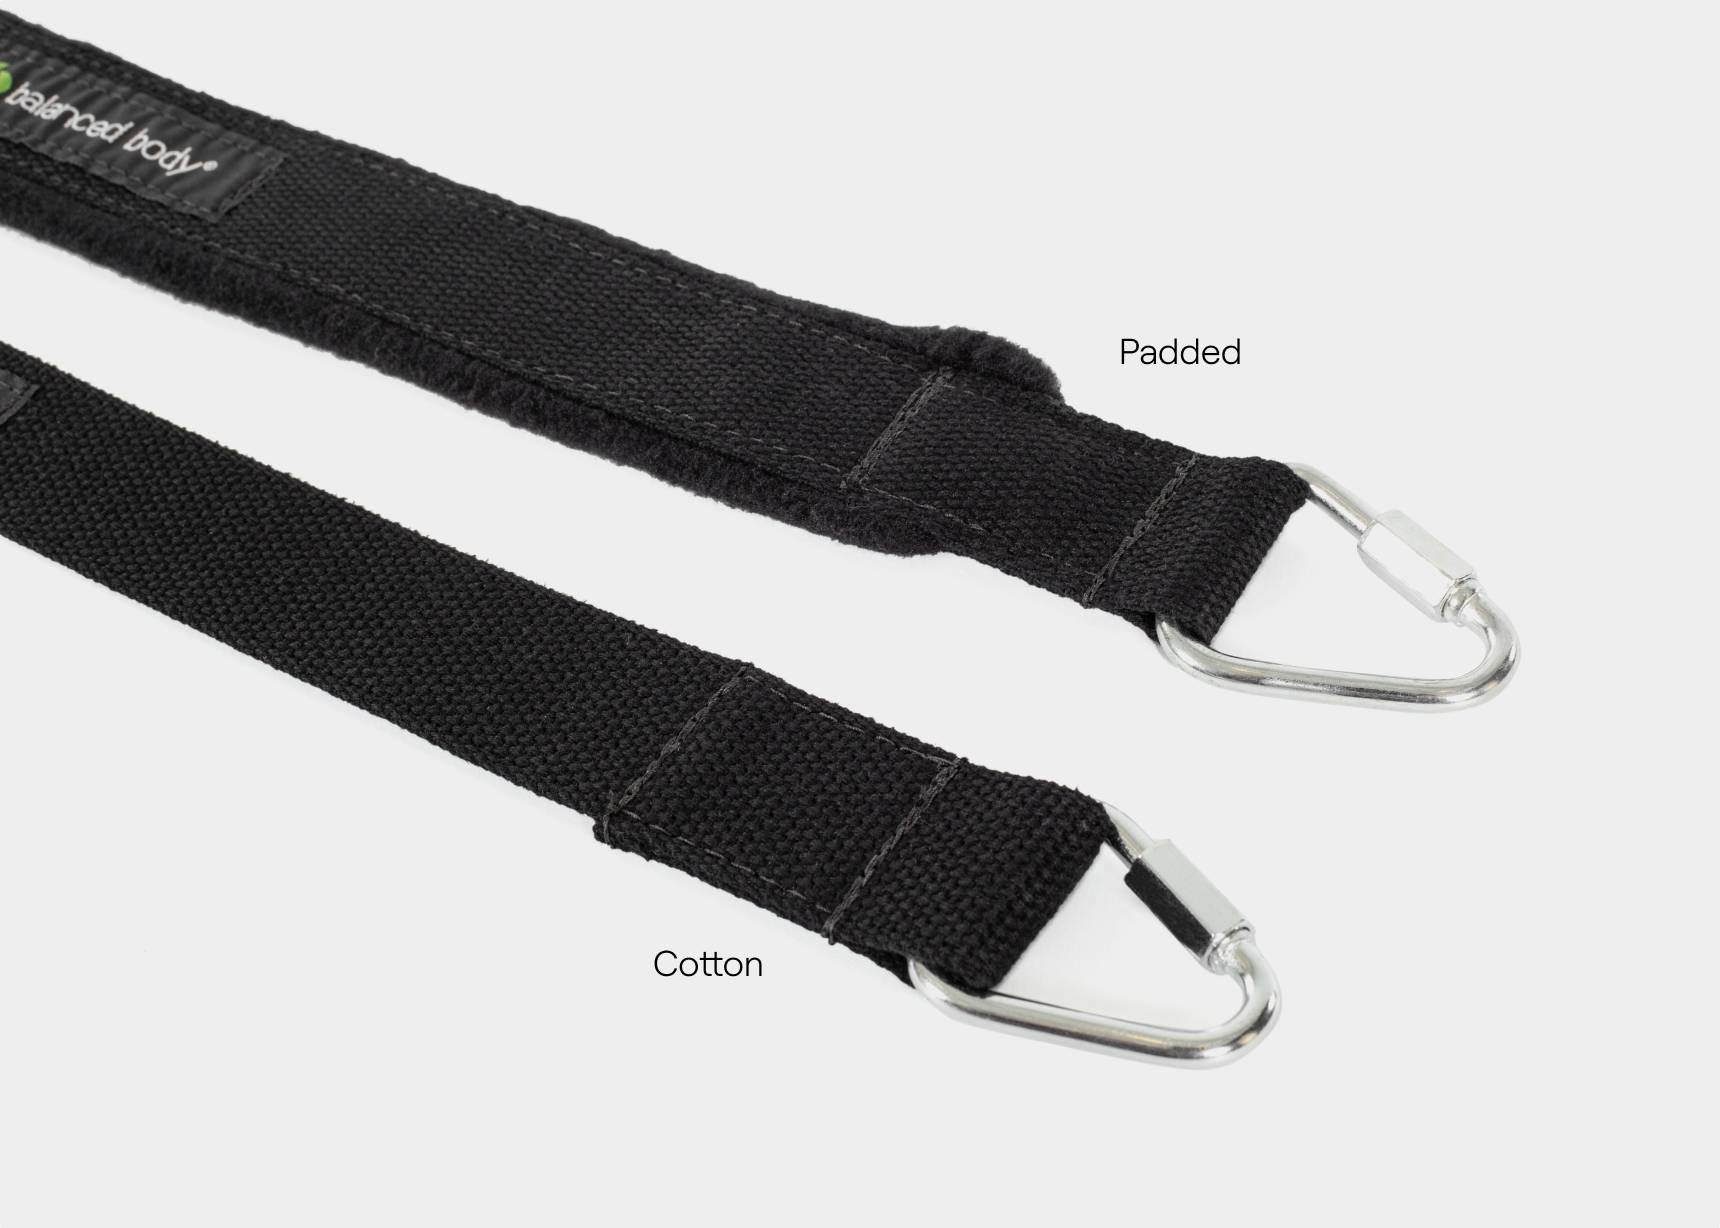 Pilates foot straps in cotton and padded versions.